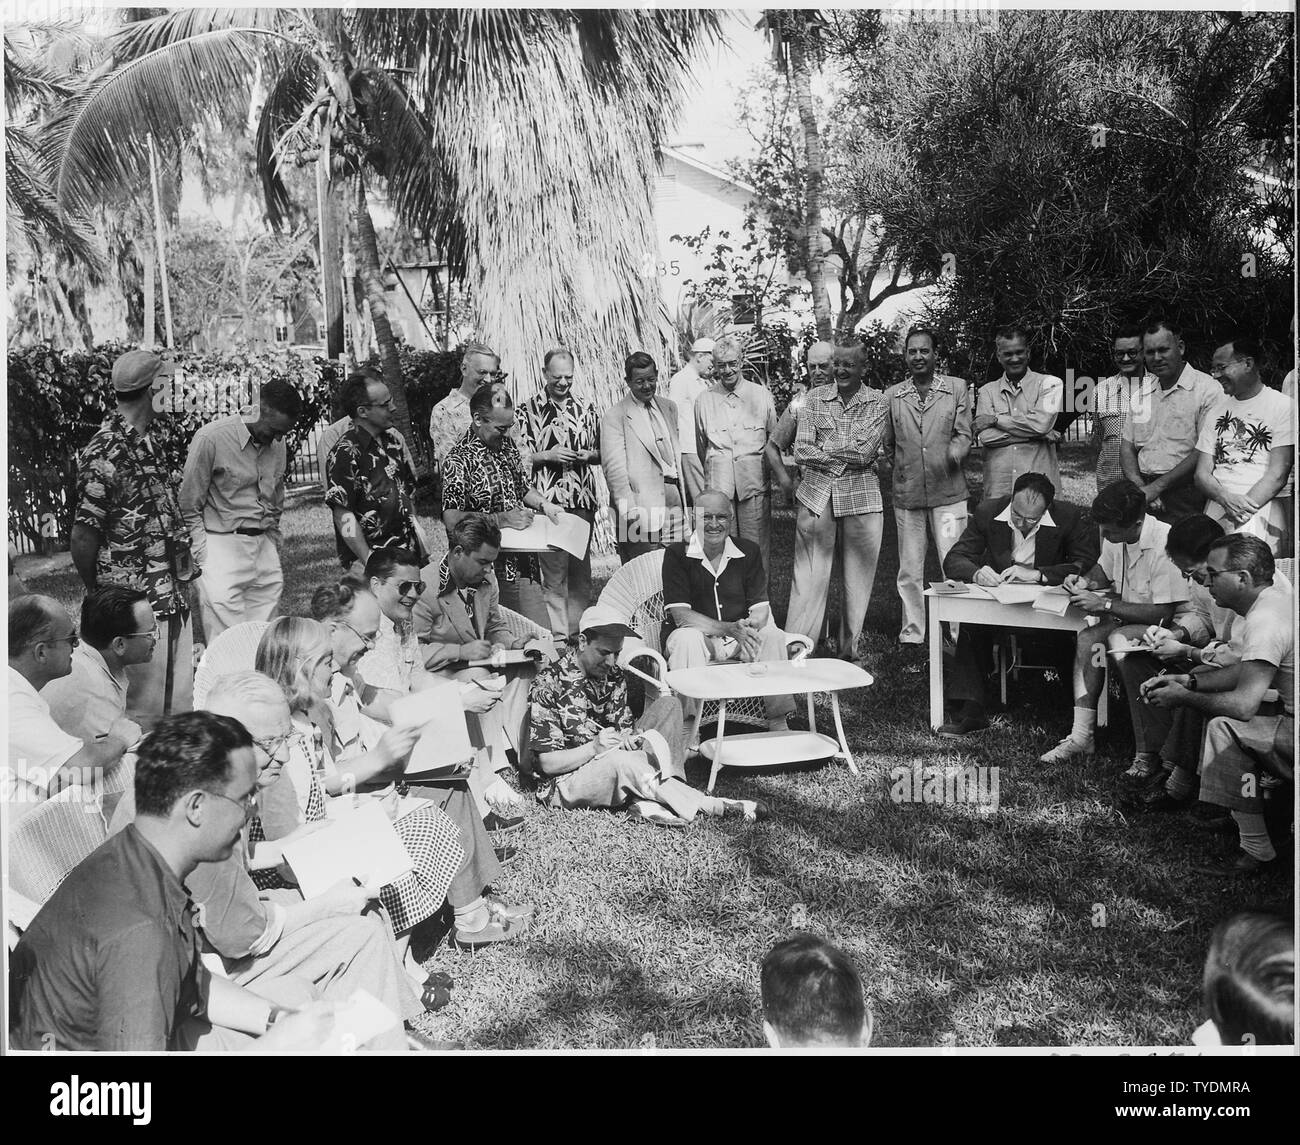 Photograph of President Truman smiling during his press conference in the garden of the Little White House at Key West, Florida. Stock Photo